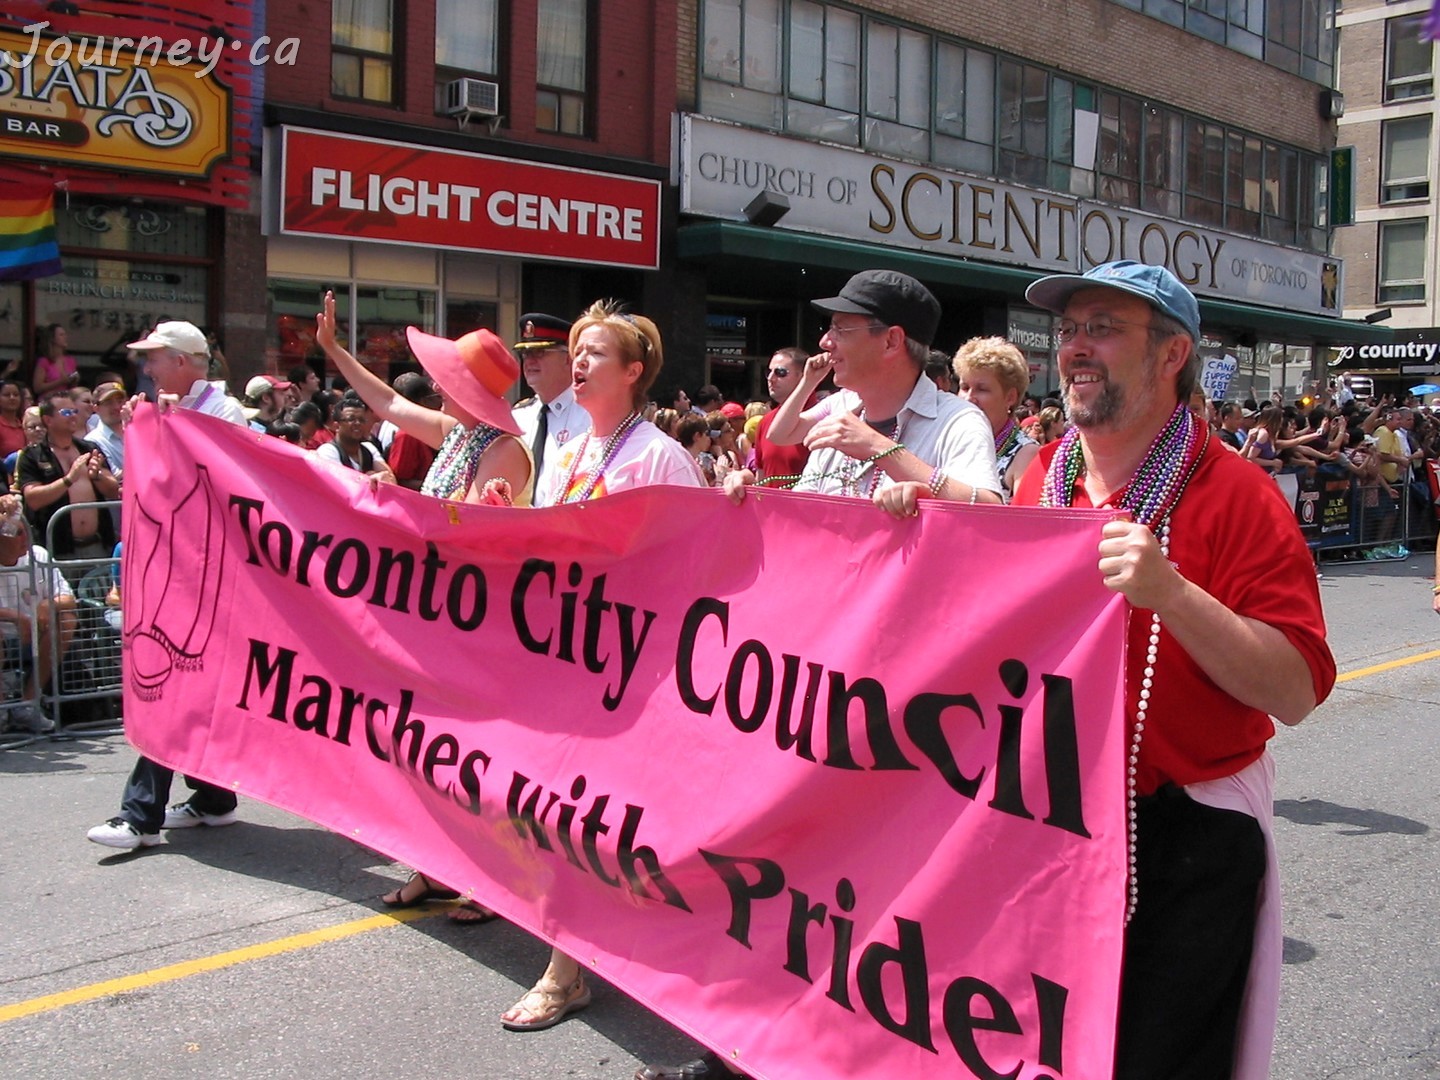 Toronto City Council Marches with Pride